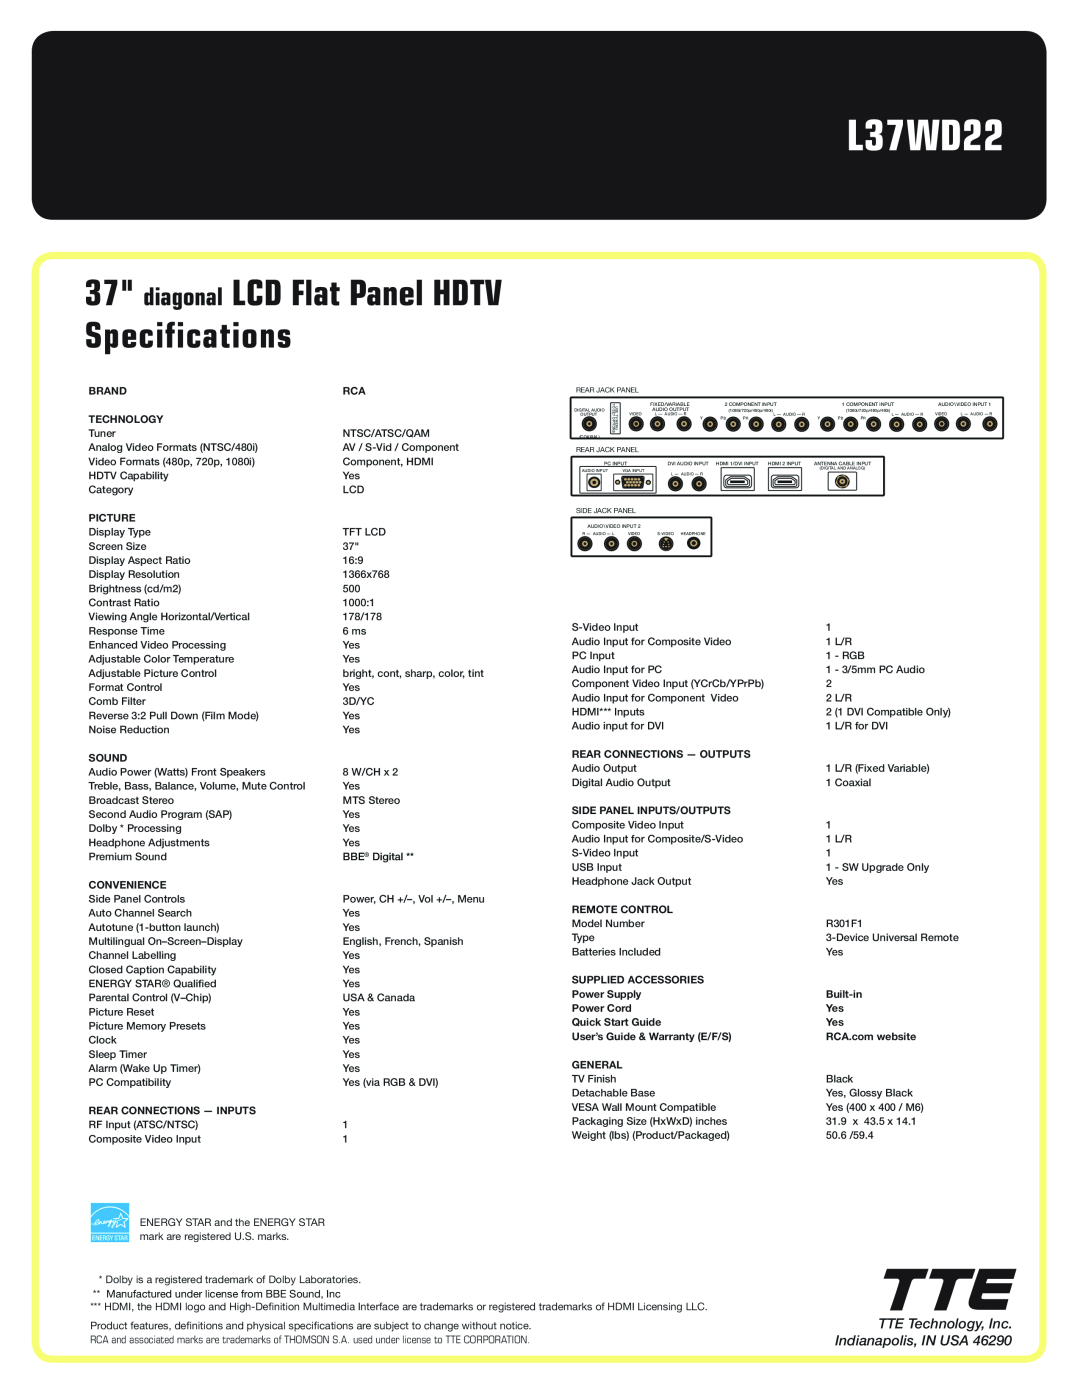 RCA L37WD22 manual diagonal LCD Flat Panel HDTV Specifications, TTE Technology, Inc. Indianapolis, IN USA 